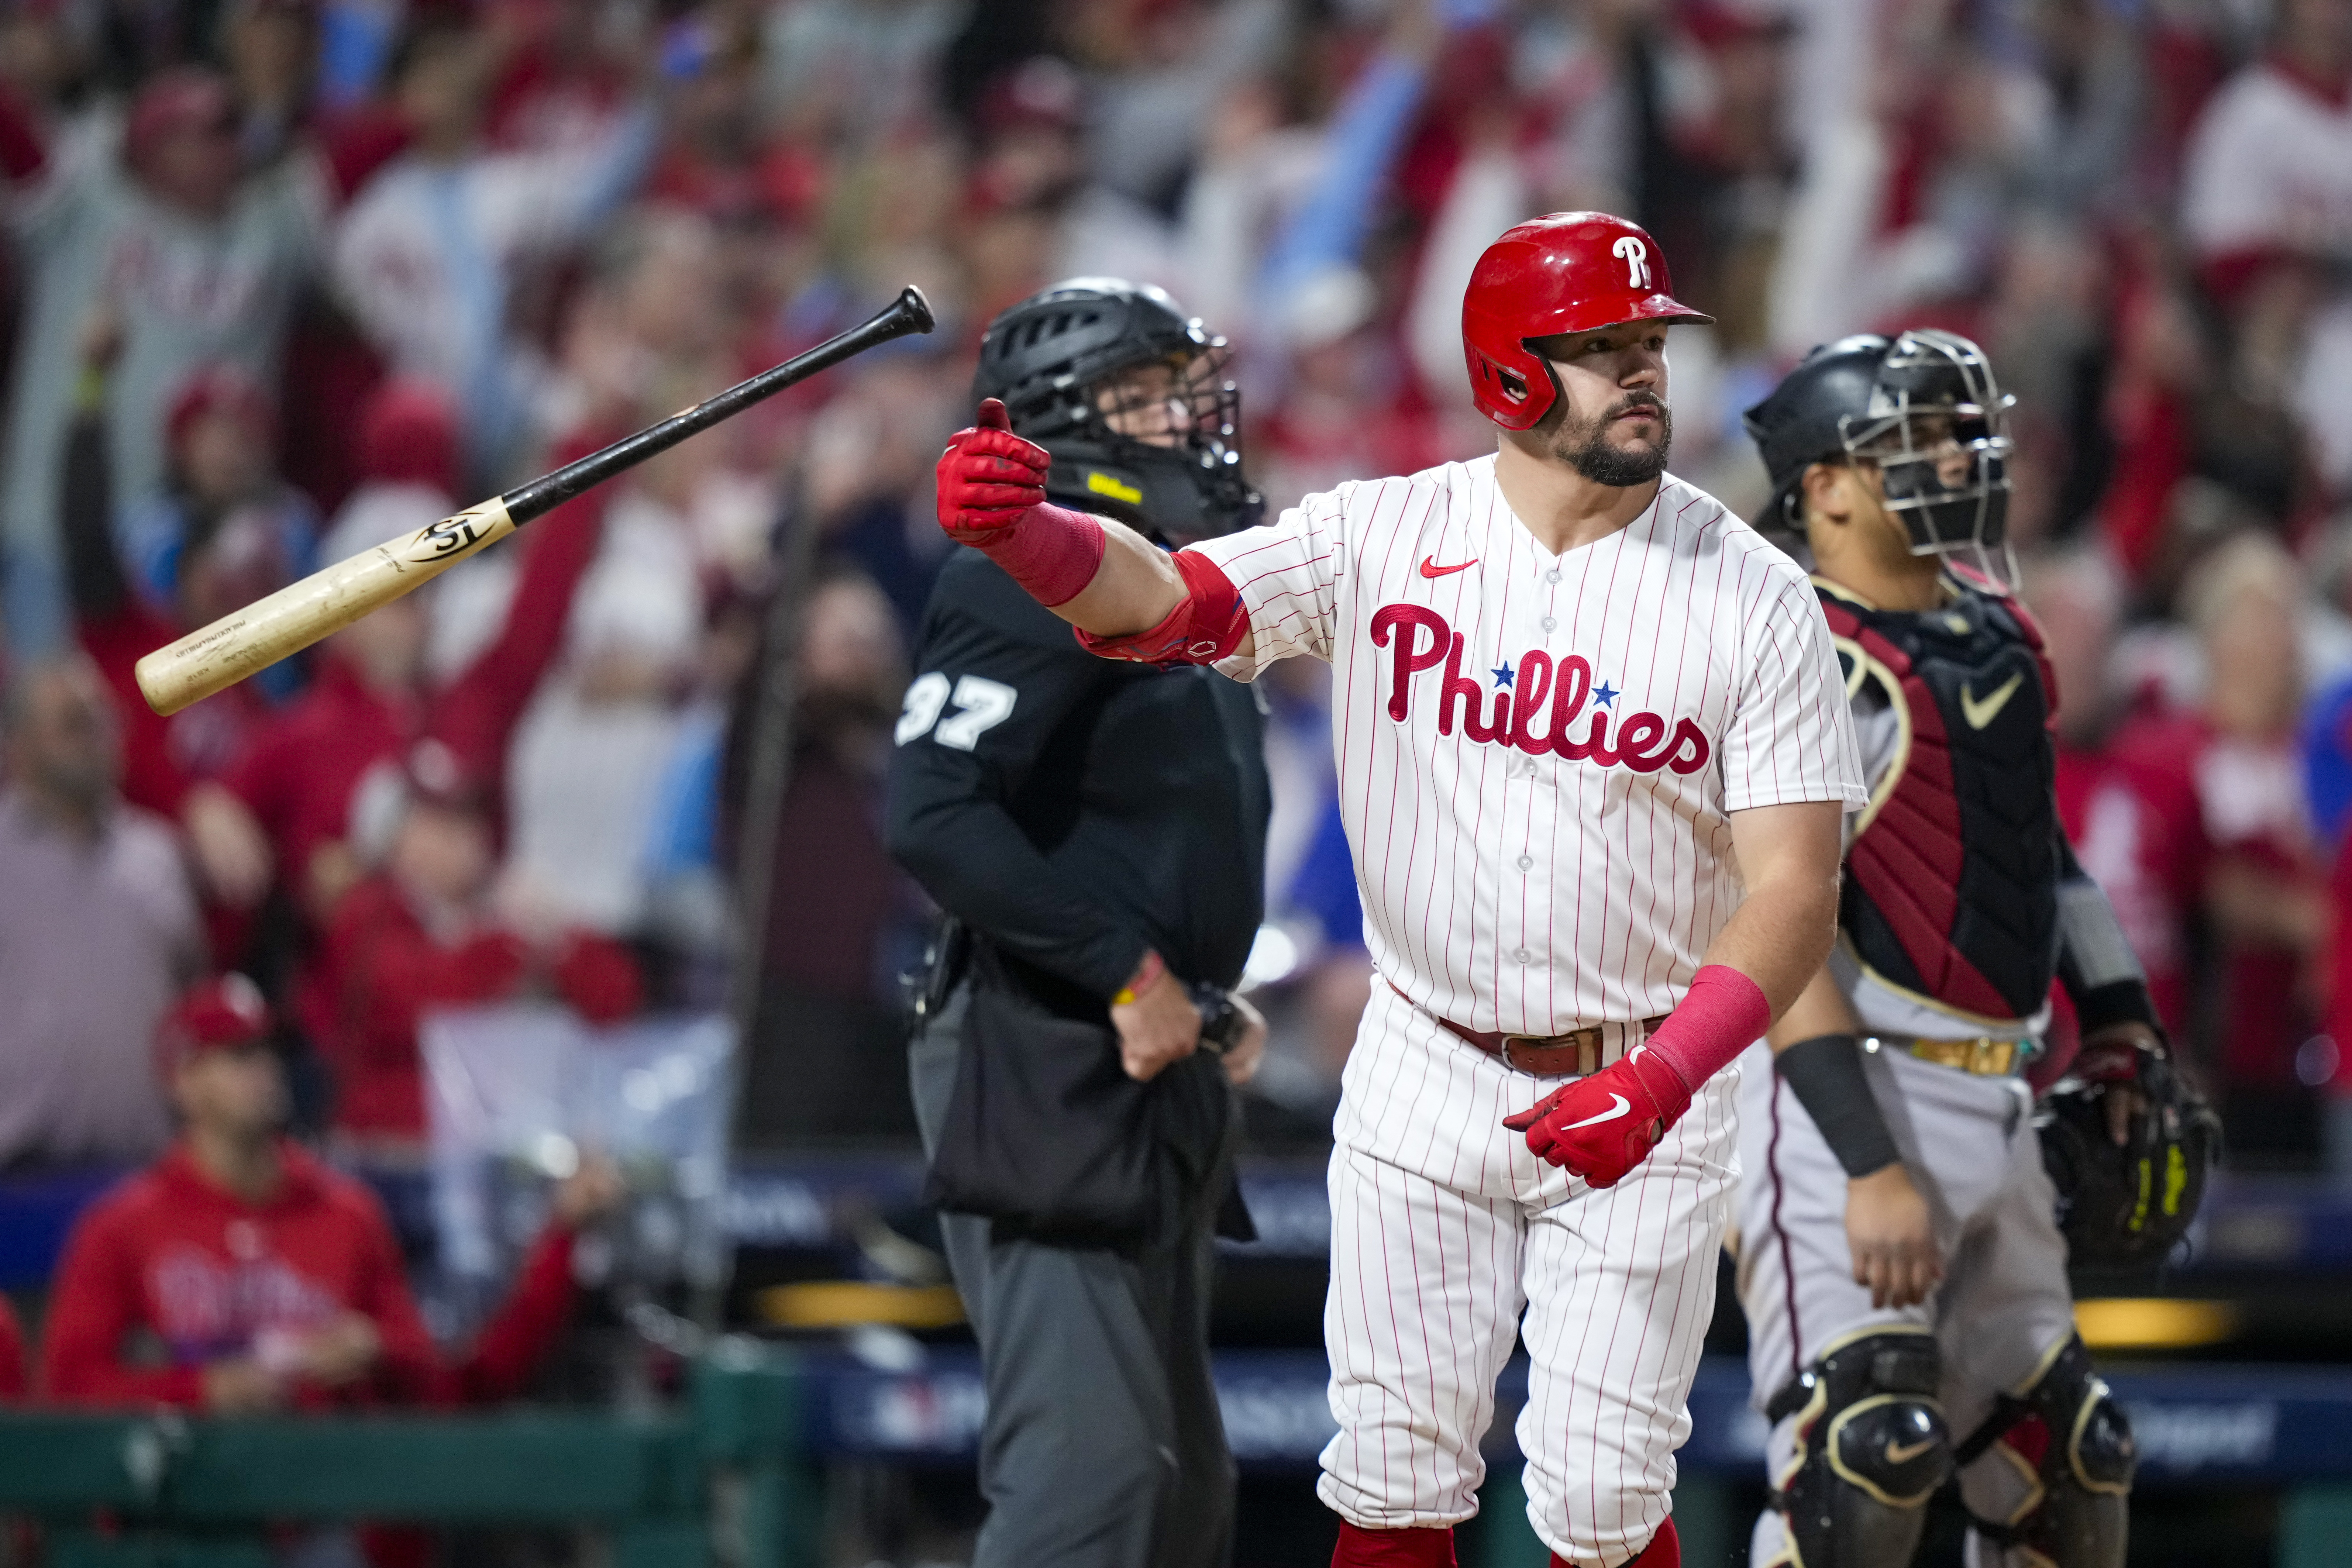 Kyle Schwarber to New York Yankees? Here are the pros and cons